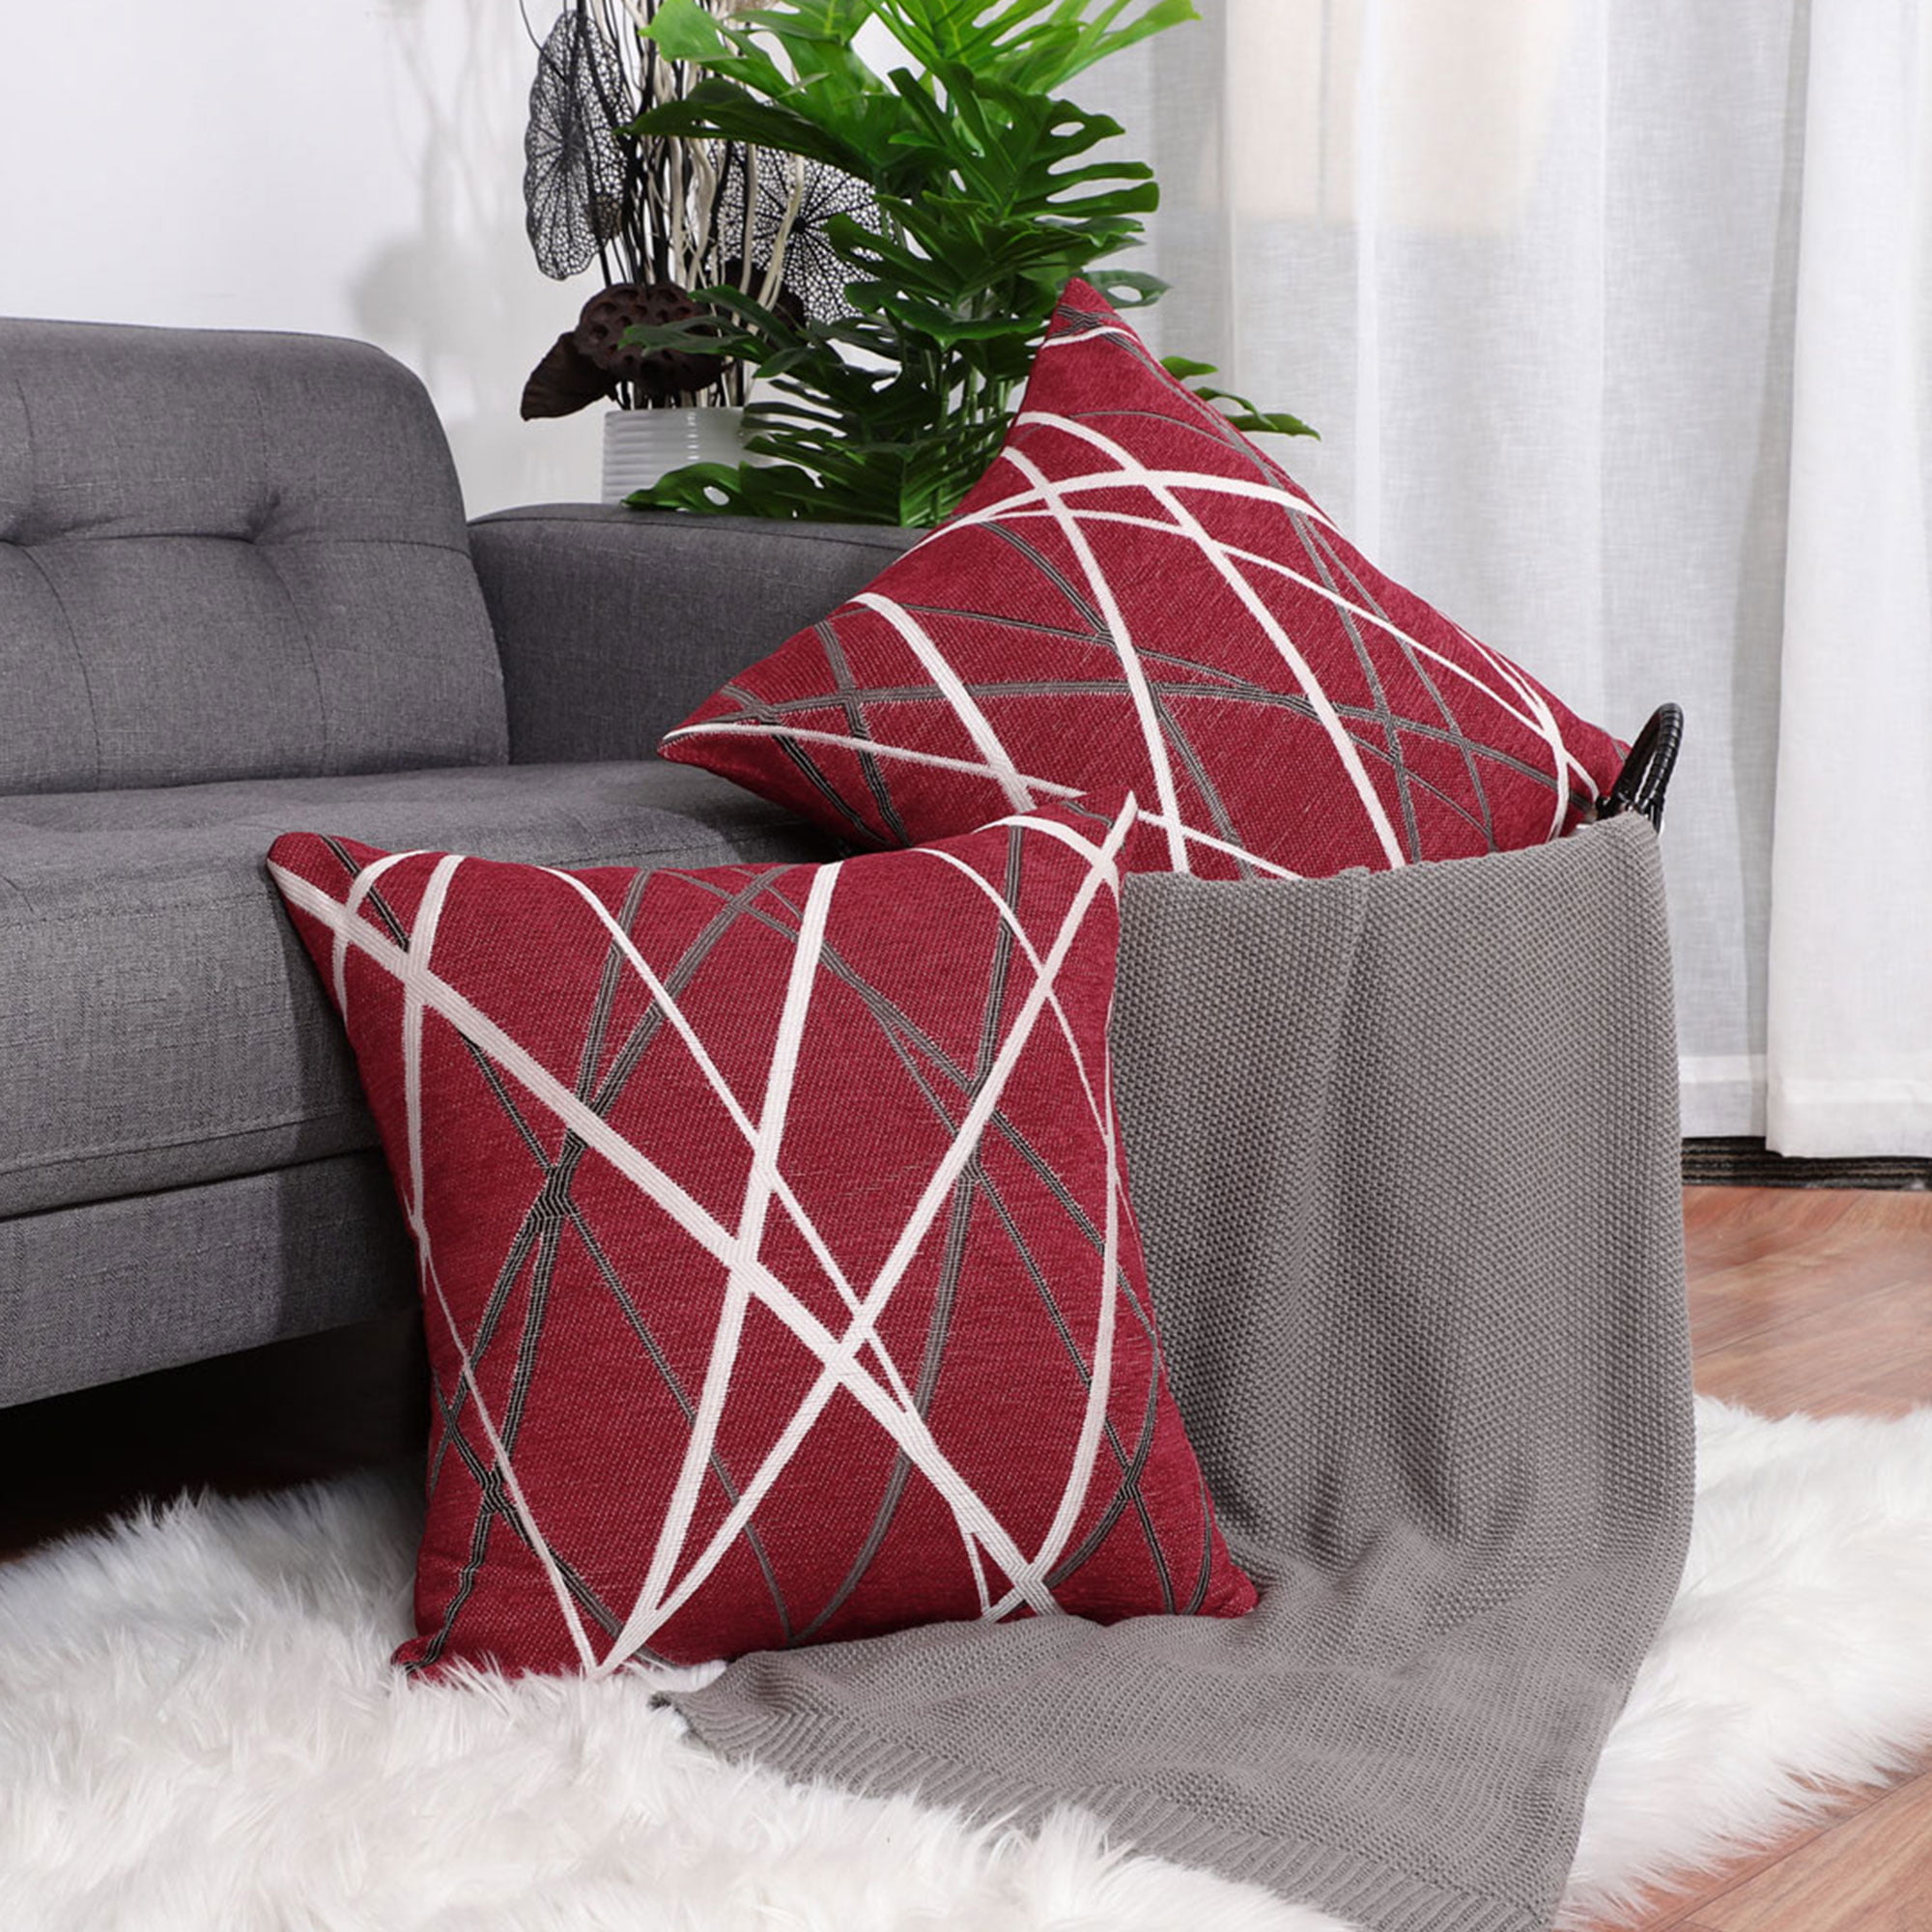 Pack of 2 Decorative Throw Pillow Covers Woven Textured Chenille Modern ...